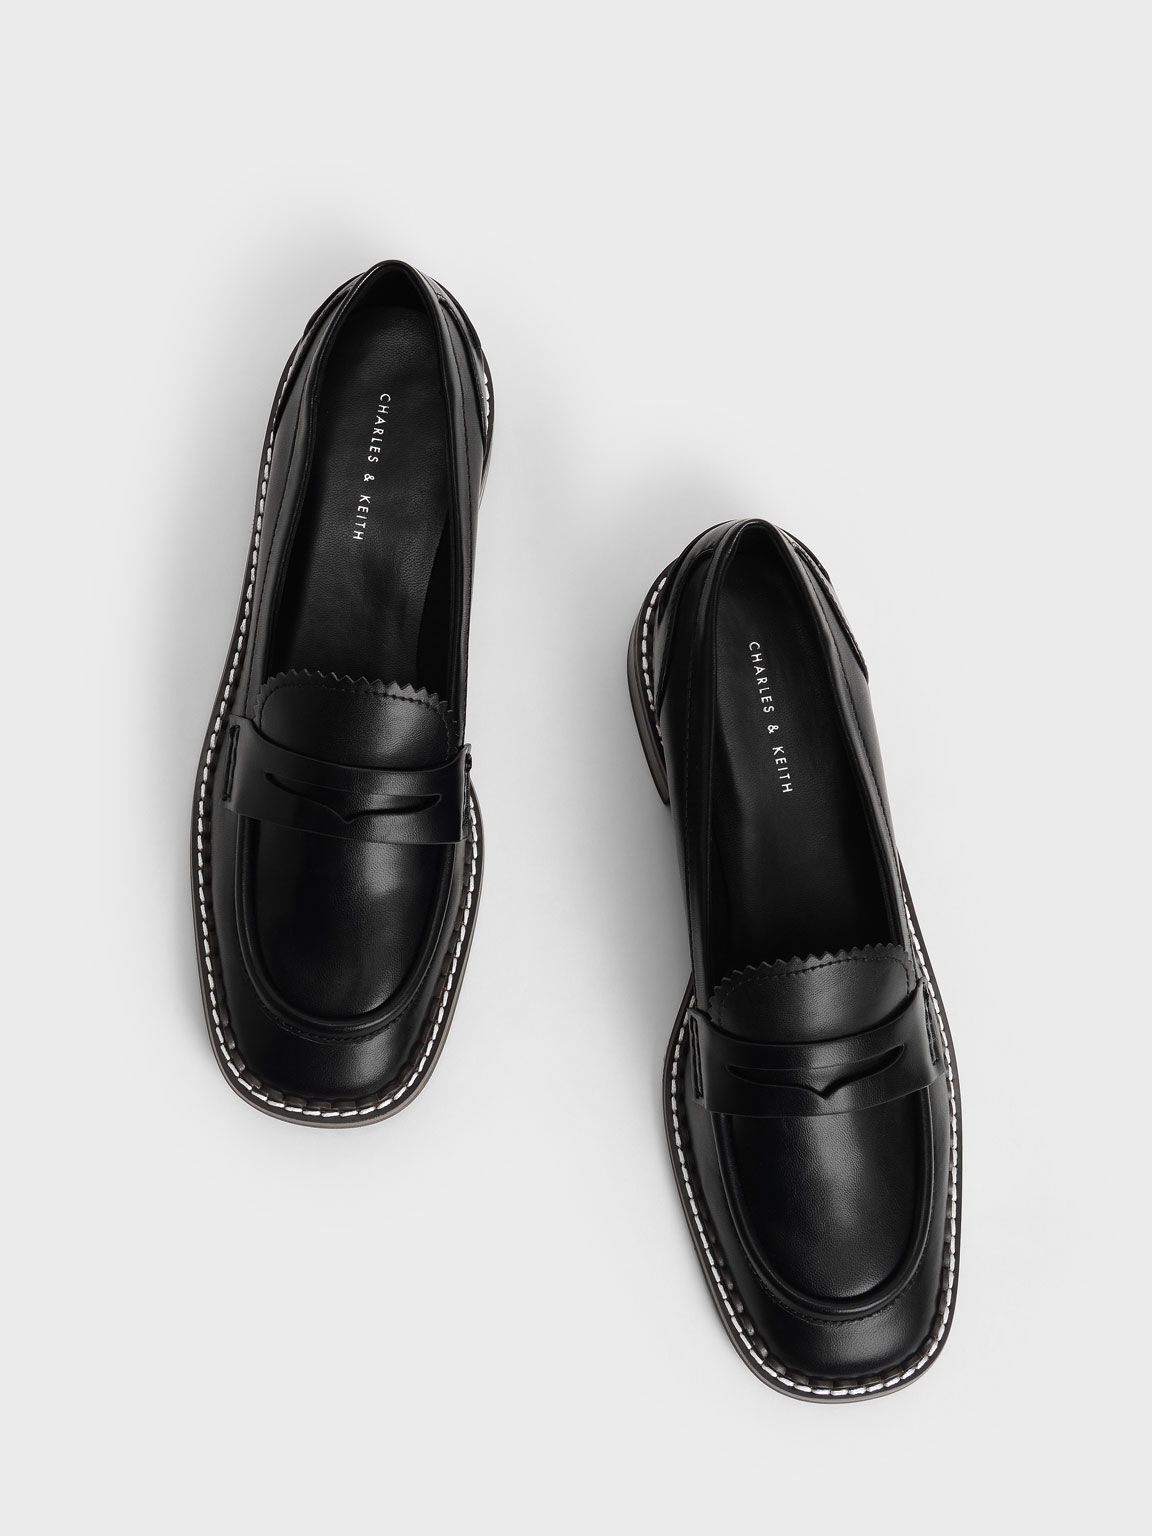 Scallop-Trim Penny Loafers, Black, hi-res